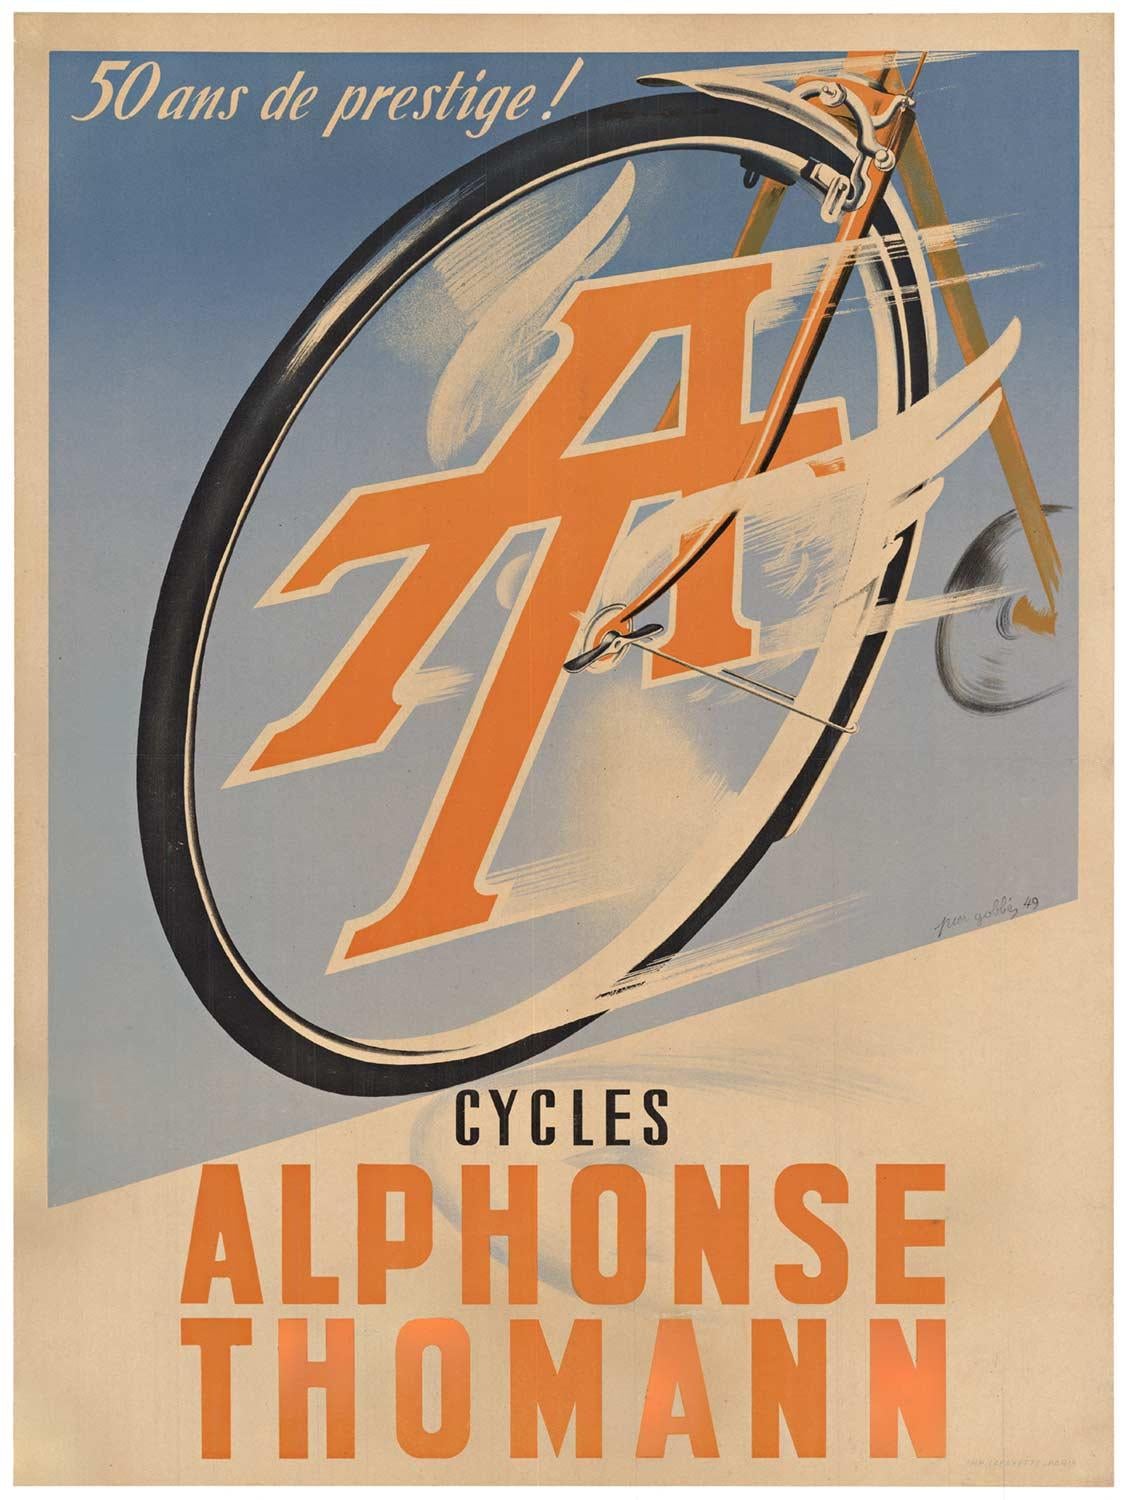 Vintage "Cycles Alphonse Thomann", 50th Anniversary bicycle poster  1949 lithog